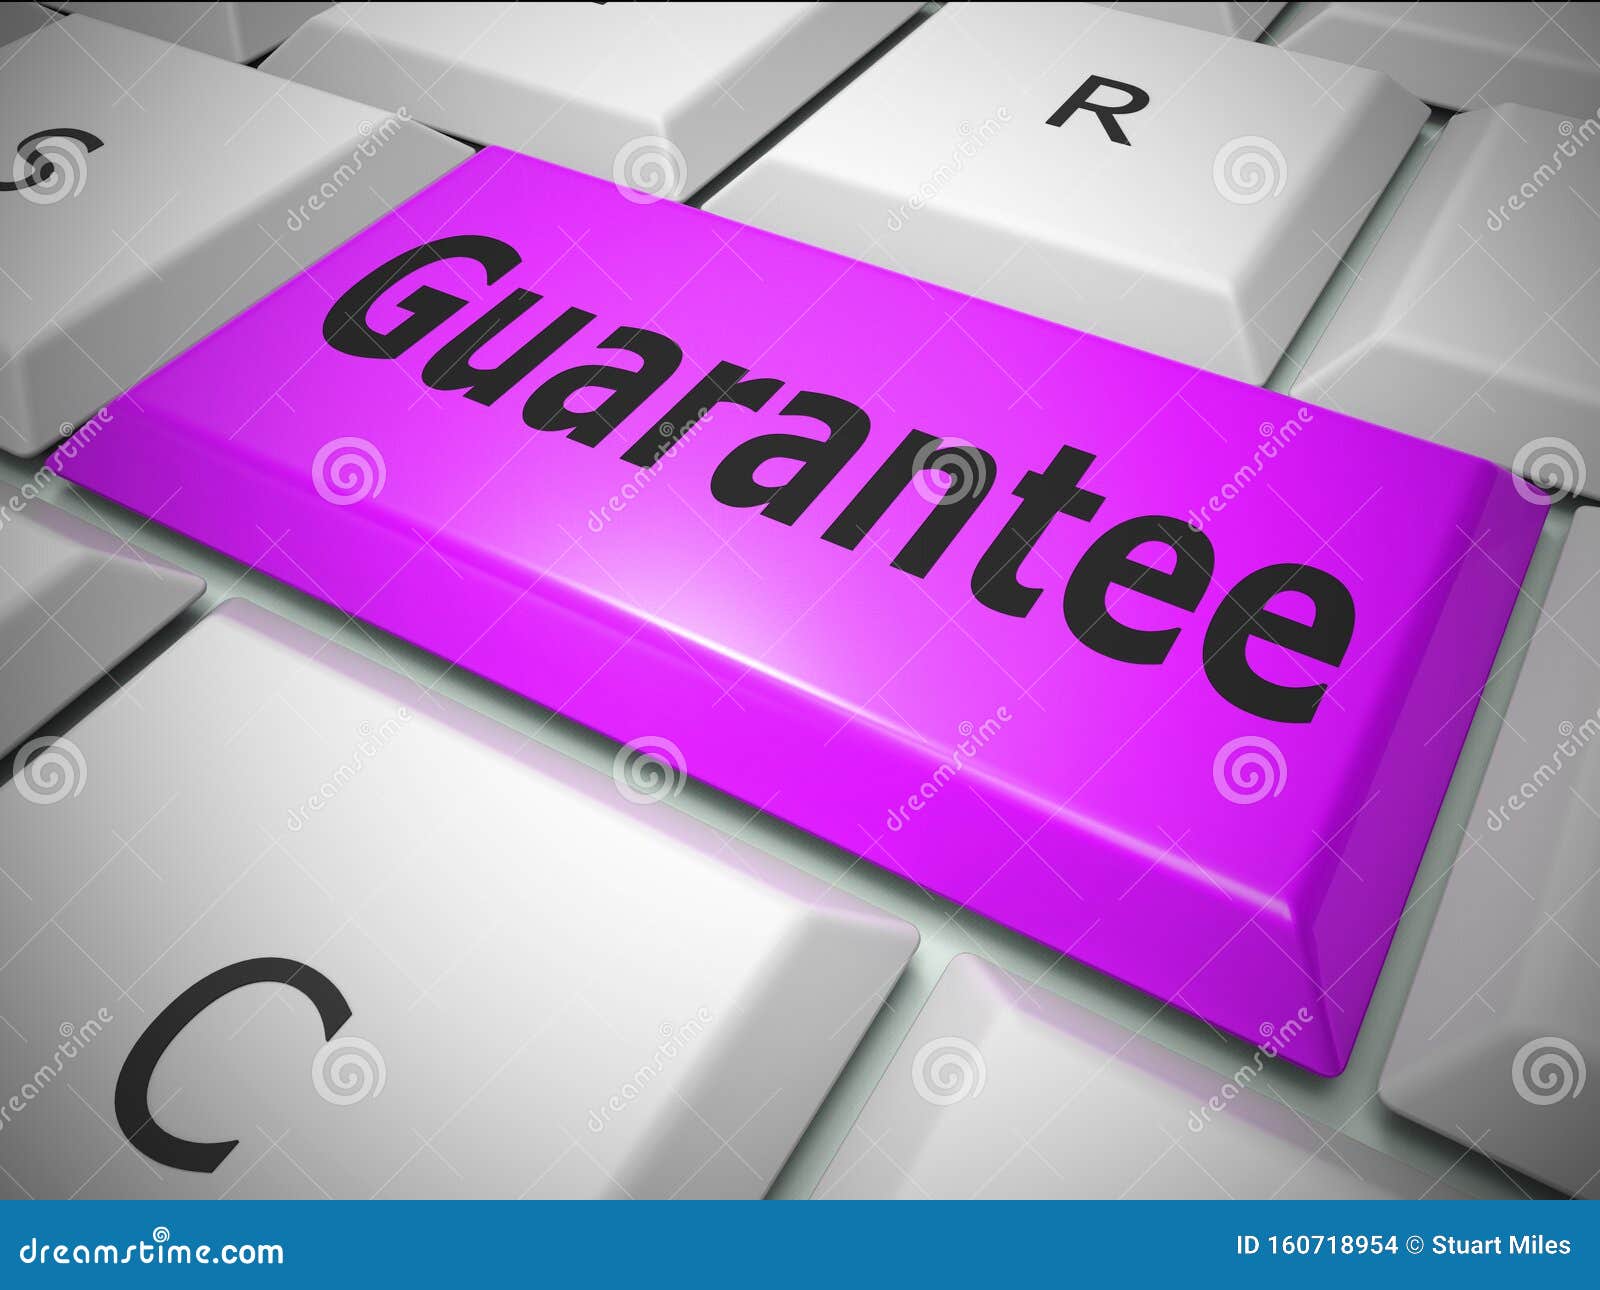 guarantee concept icon means a safeguard or insurance against product faults - 3d 